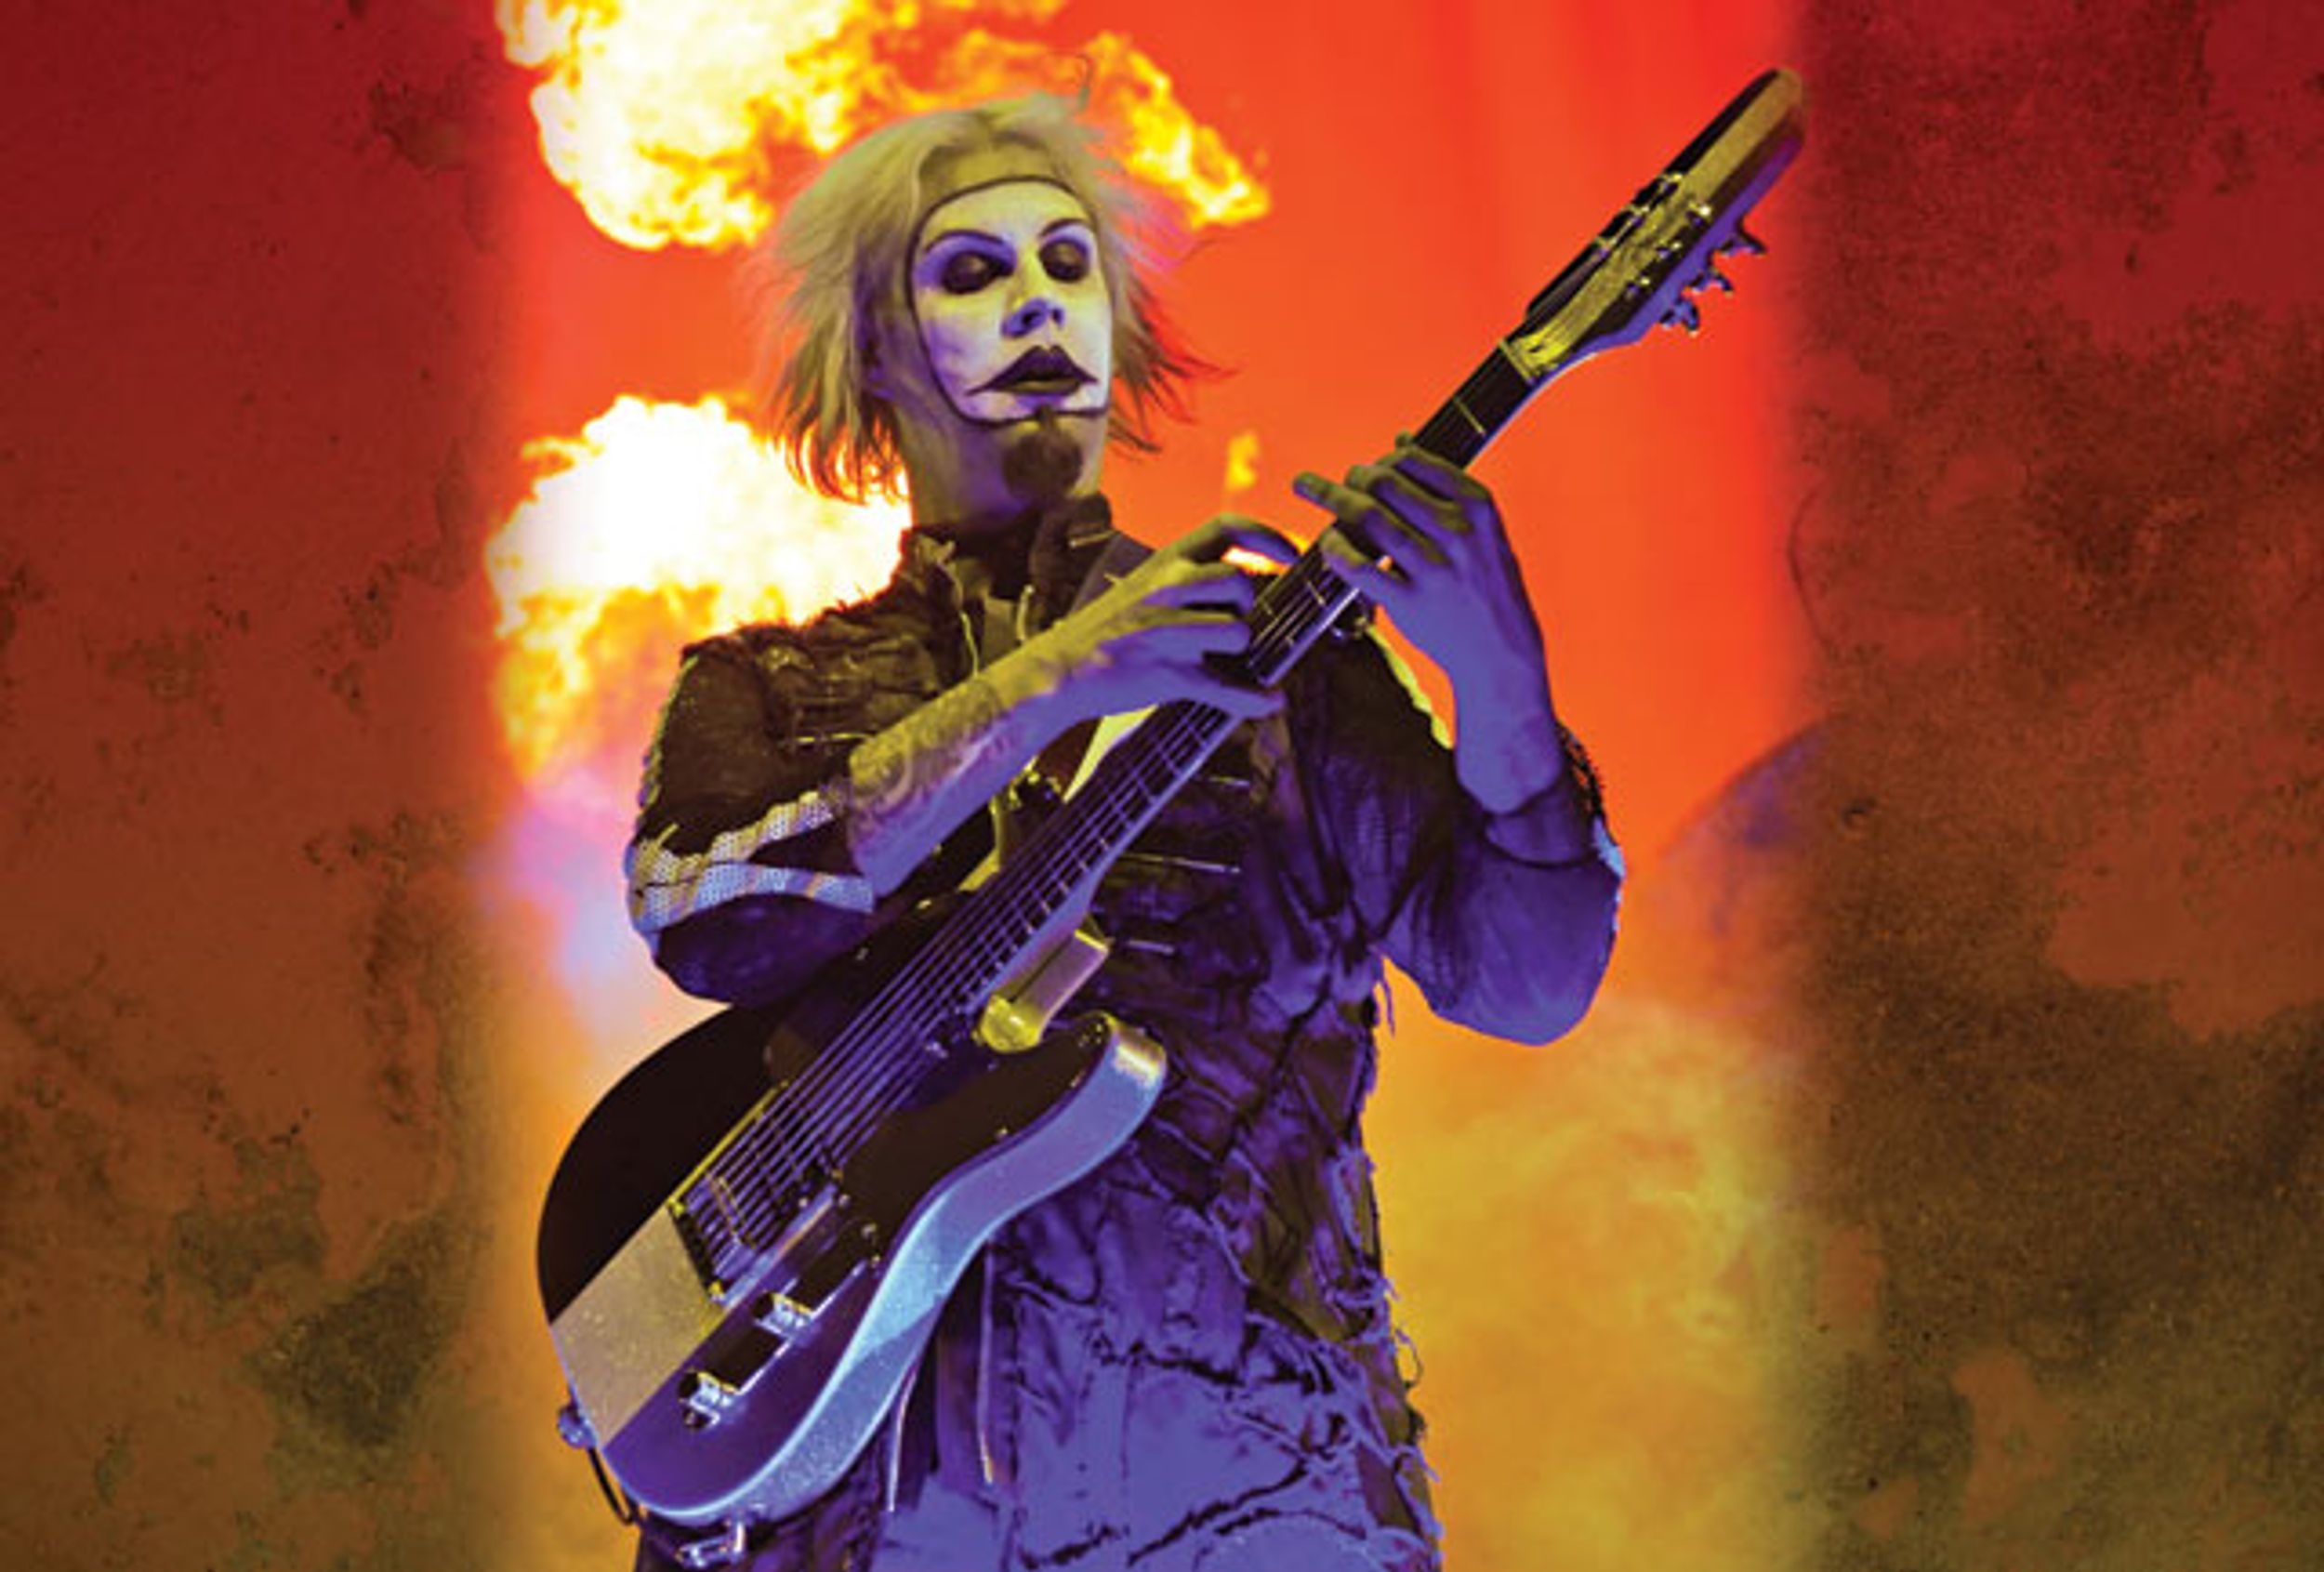 Interview: John 5 on "God Told Me To"